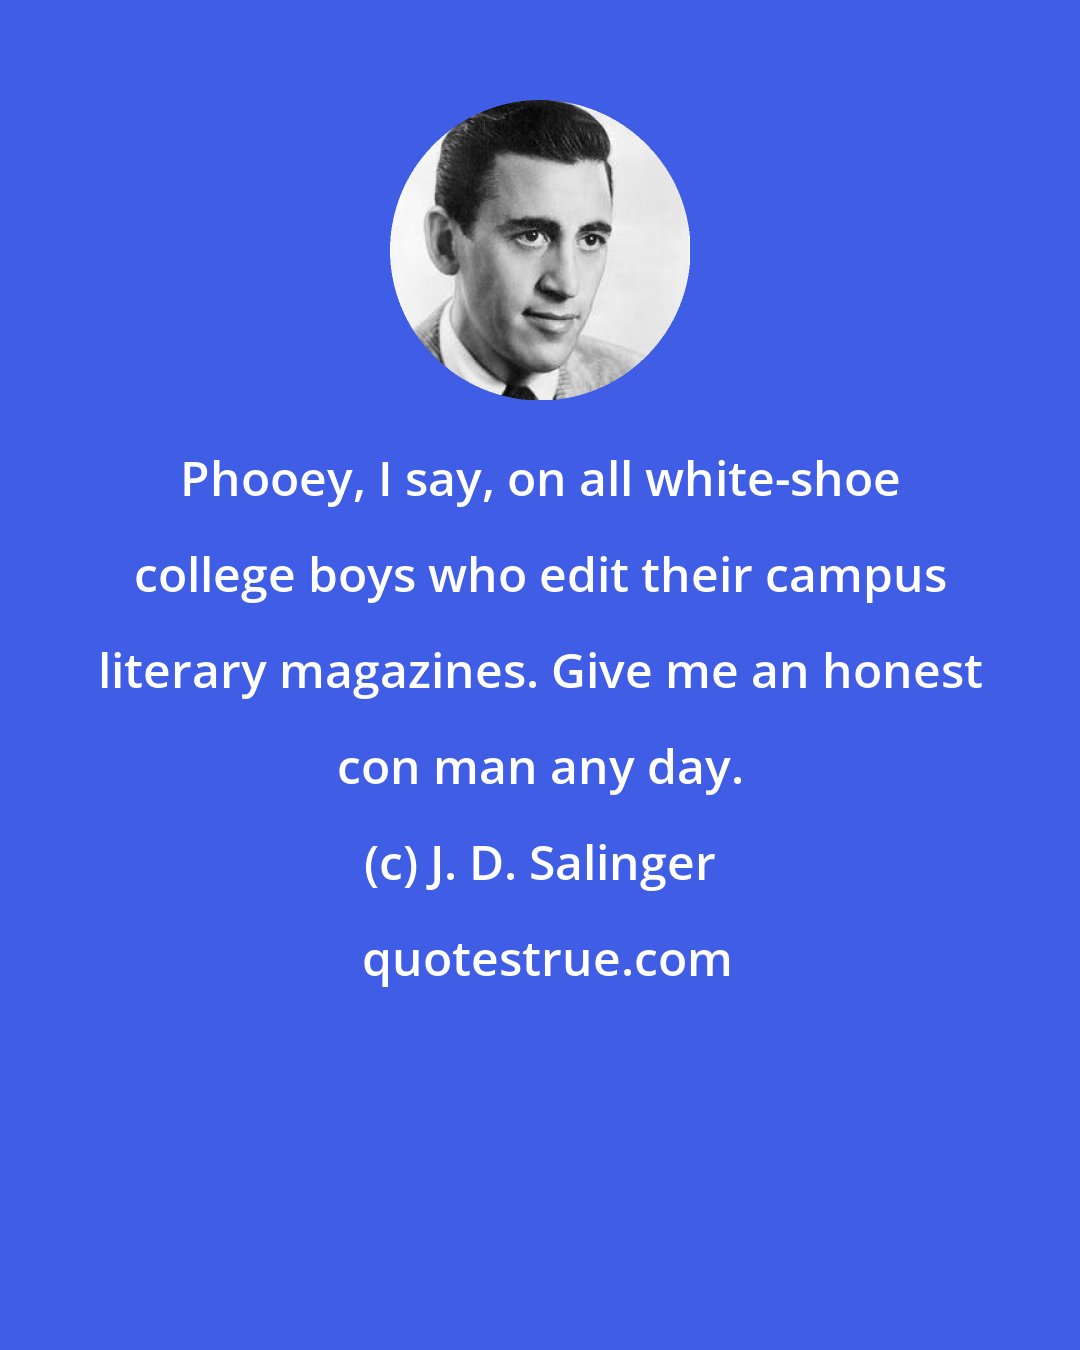 J. D. Salinger: Phooey, I say, on all white-shoe college boys who edit their campus literary magazines. Give me an honest con man any day.